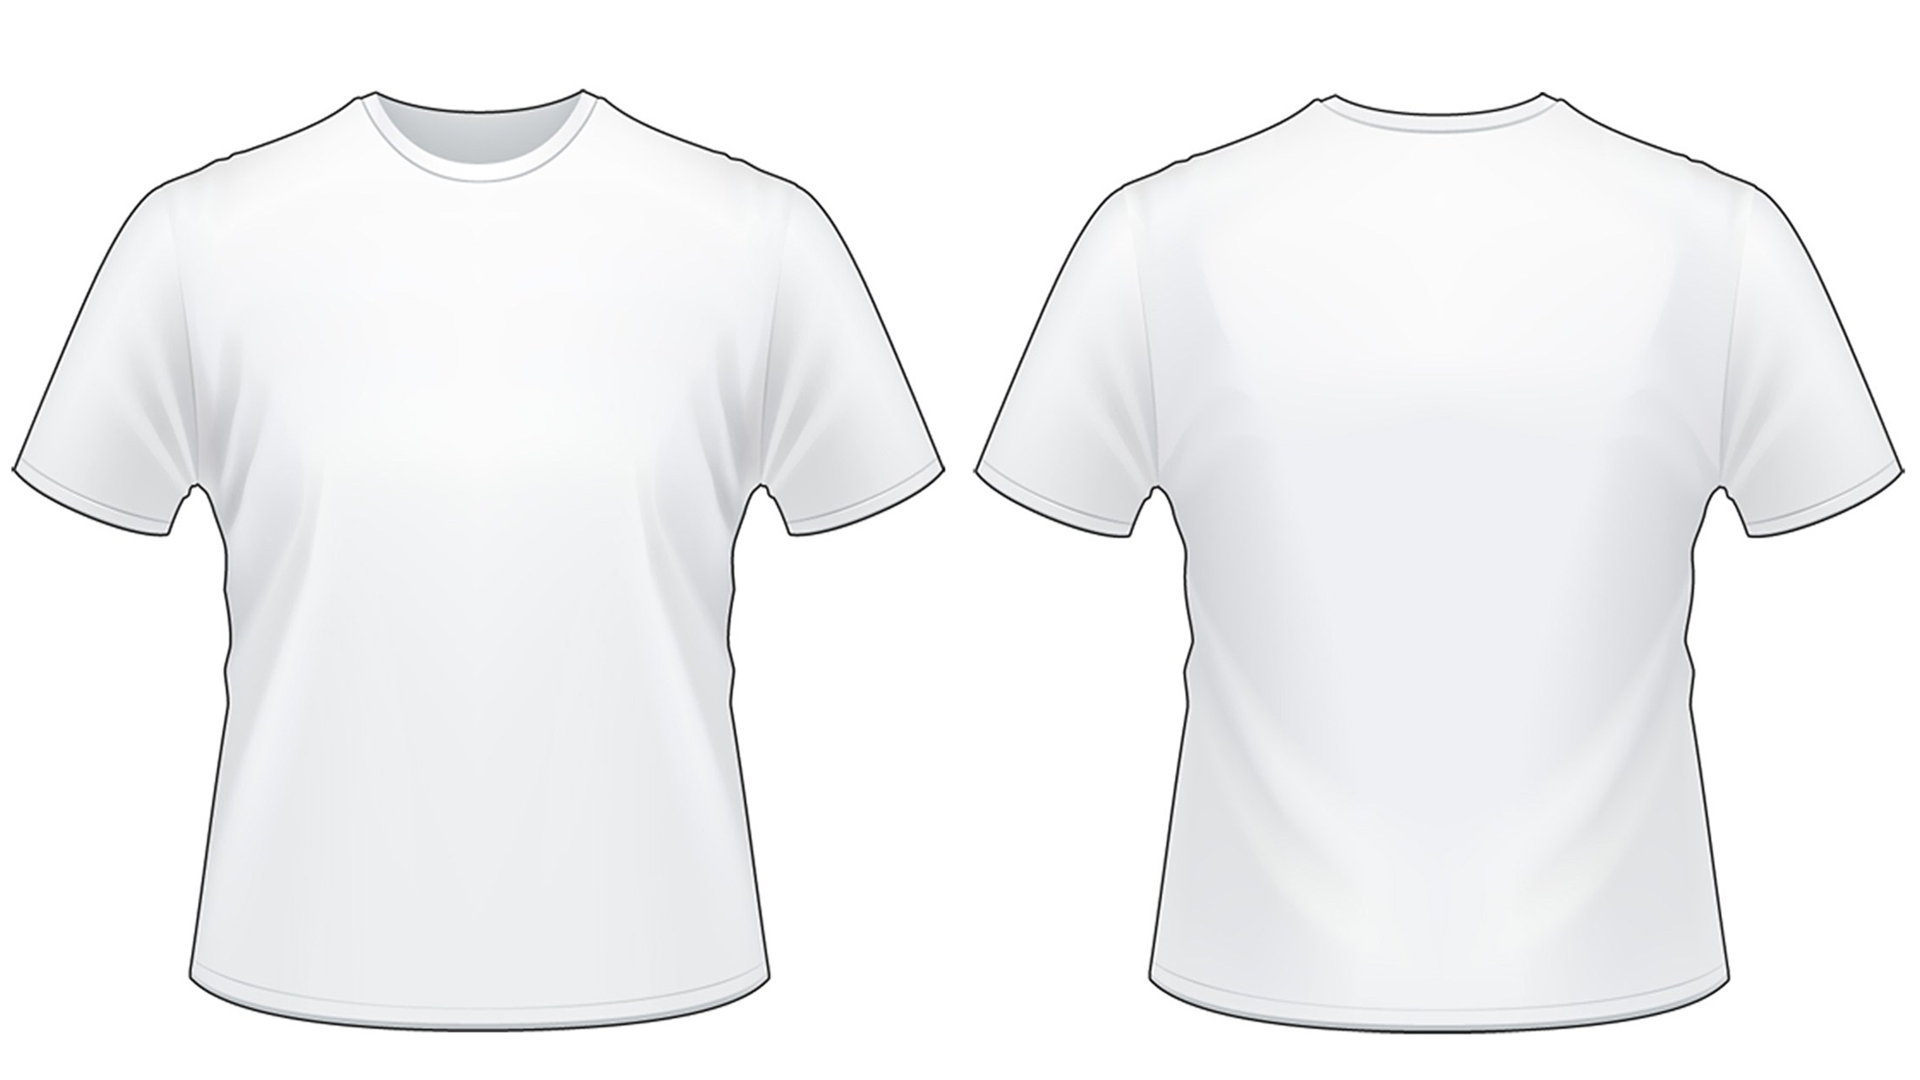 White Shirt Photos Download The BEST Free White Shirt Stock Photos  HD  Images